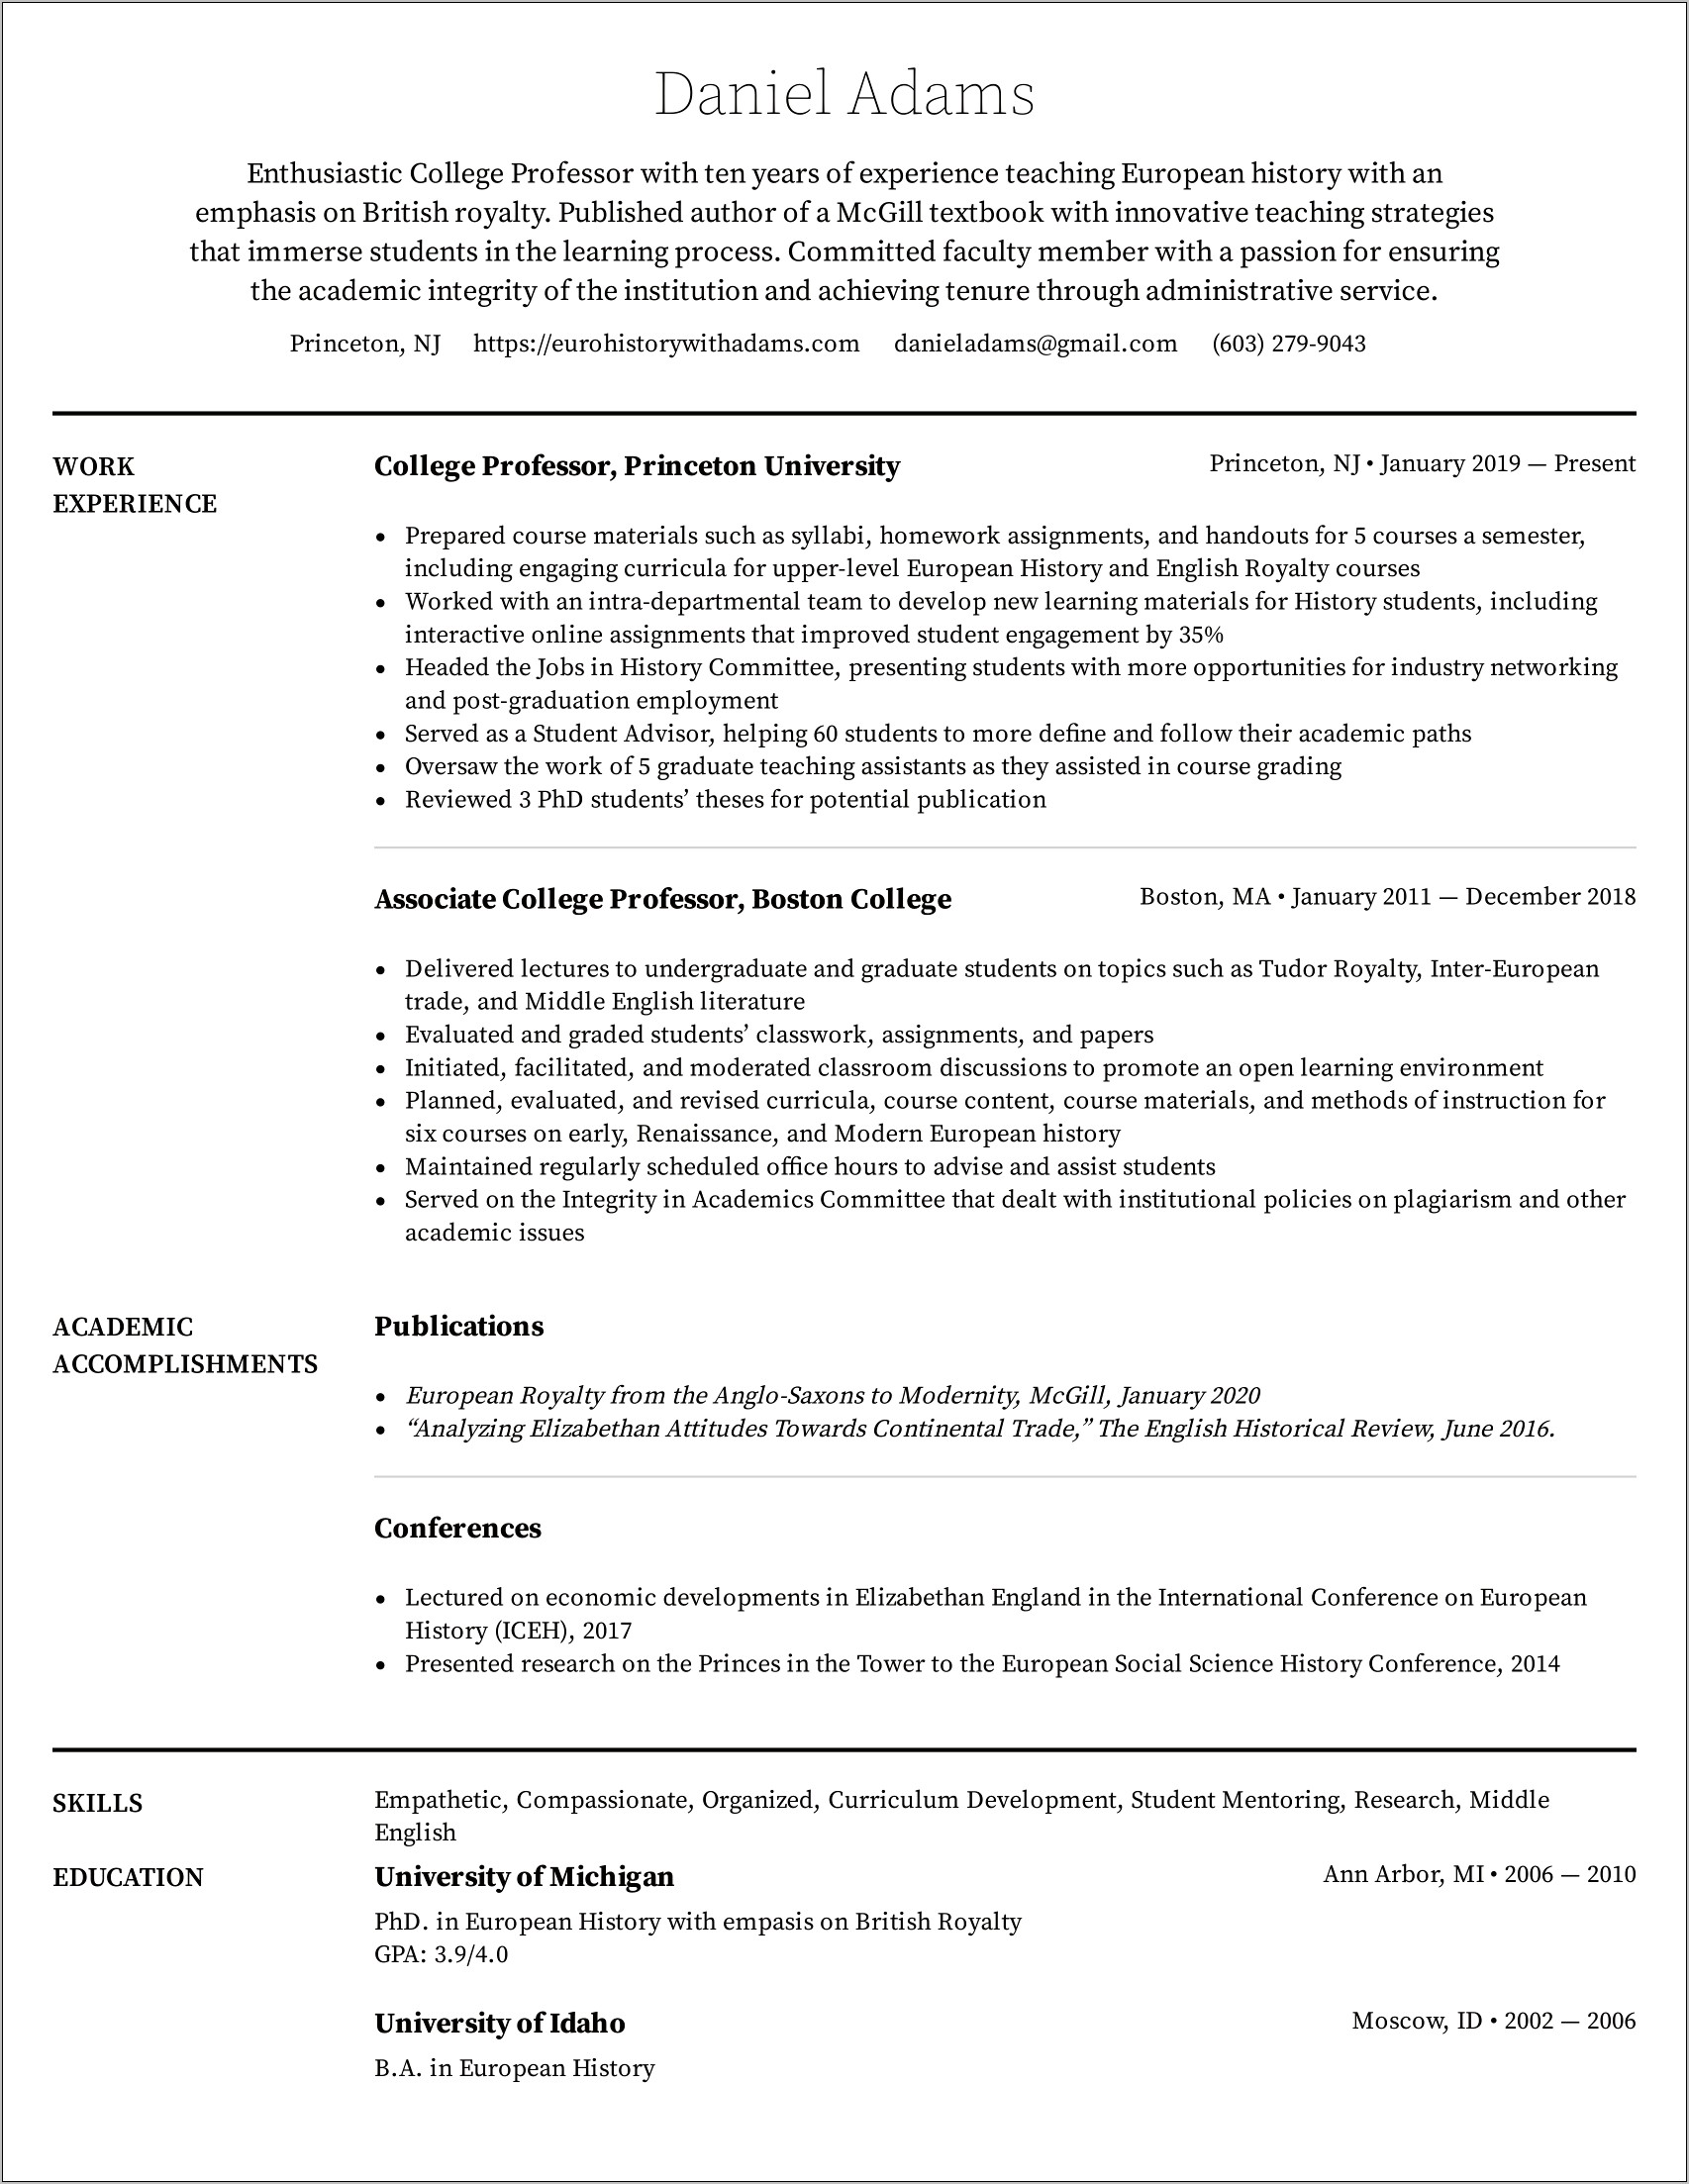 Resume Example For A College Graduate In Marketing